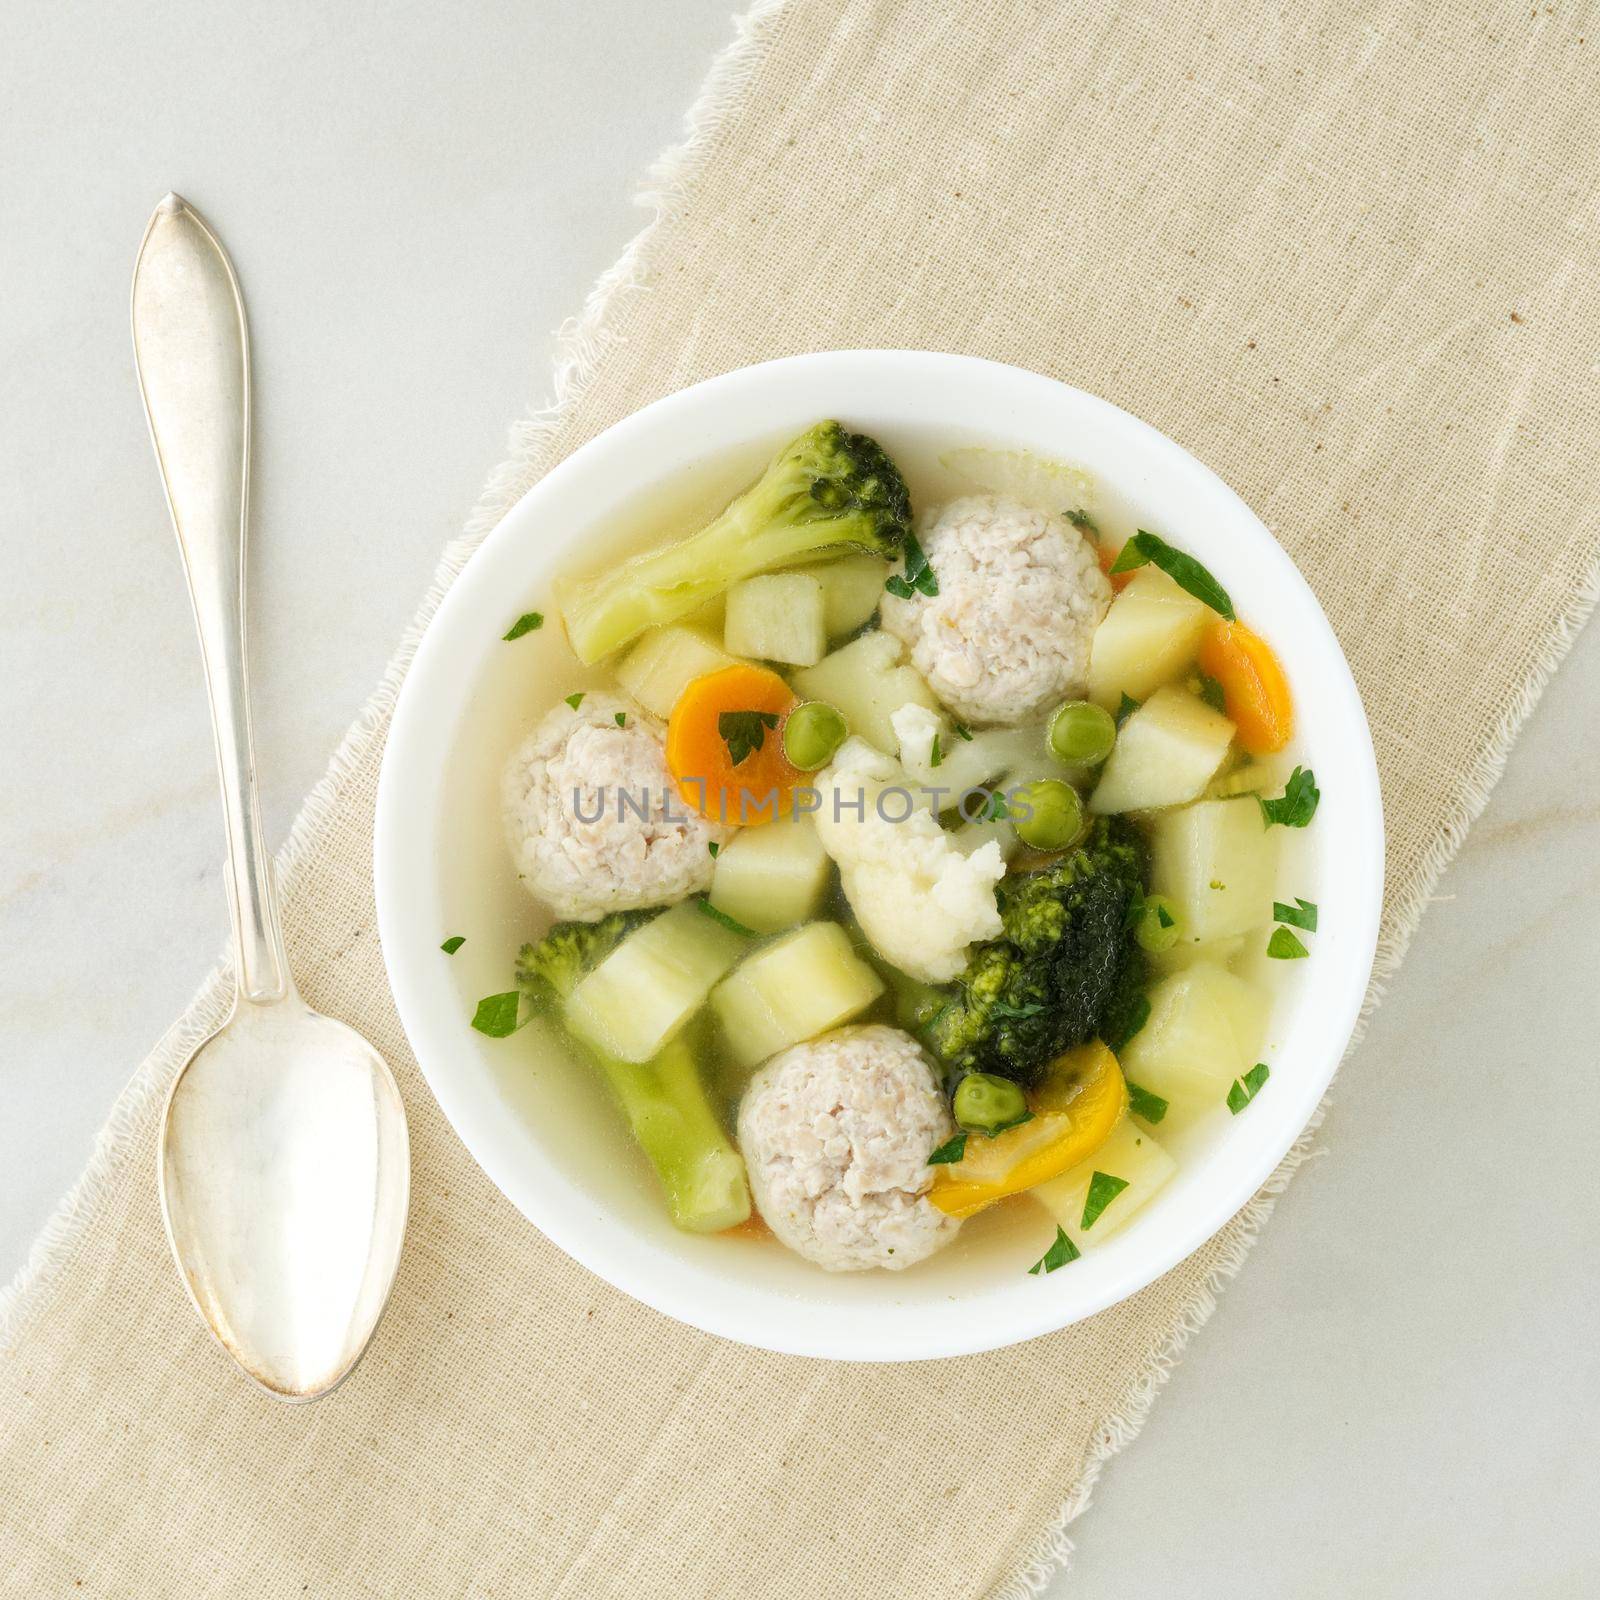 bowl of soup, a cup of broth and vegetables, meatballs made of turkey and a chicken, top view